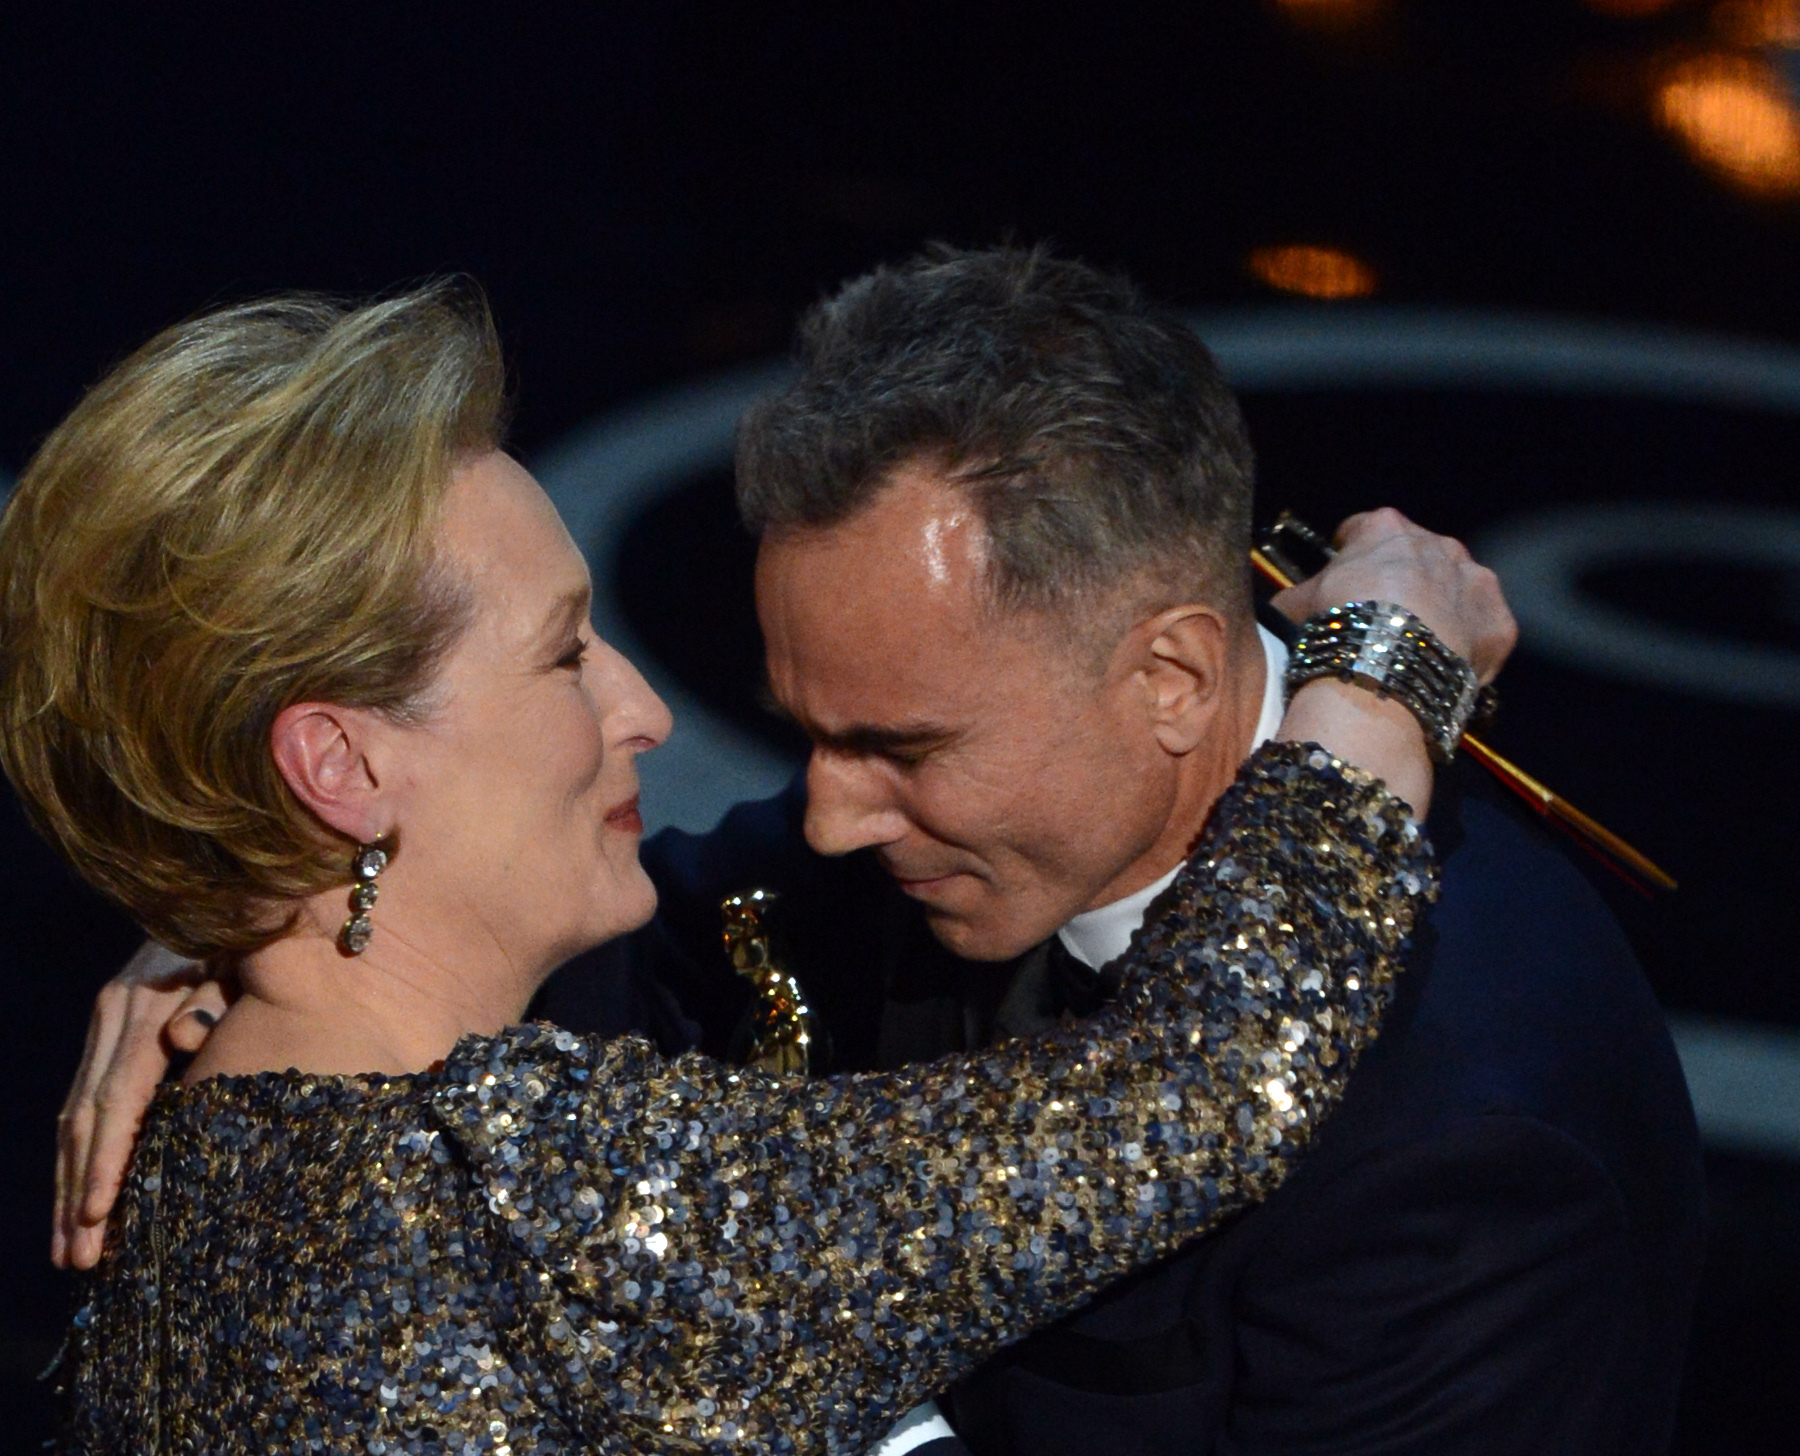 Daniel Day-Lewis and Meryl Streep at event of The Oscars (2013)